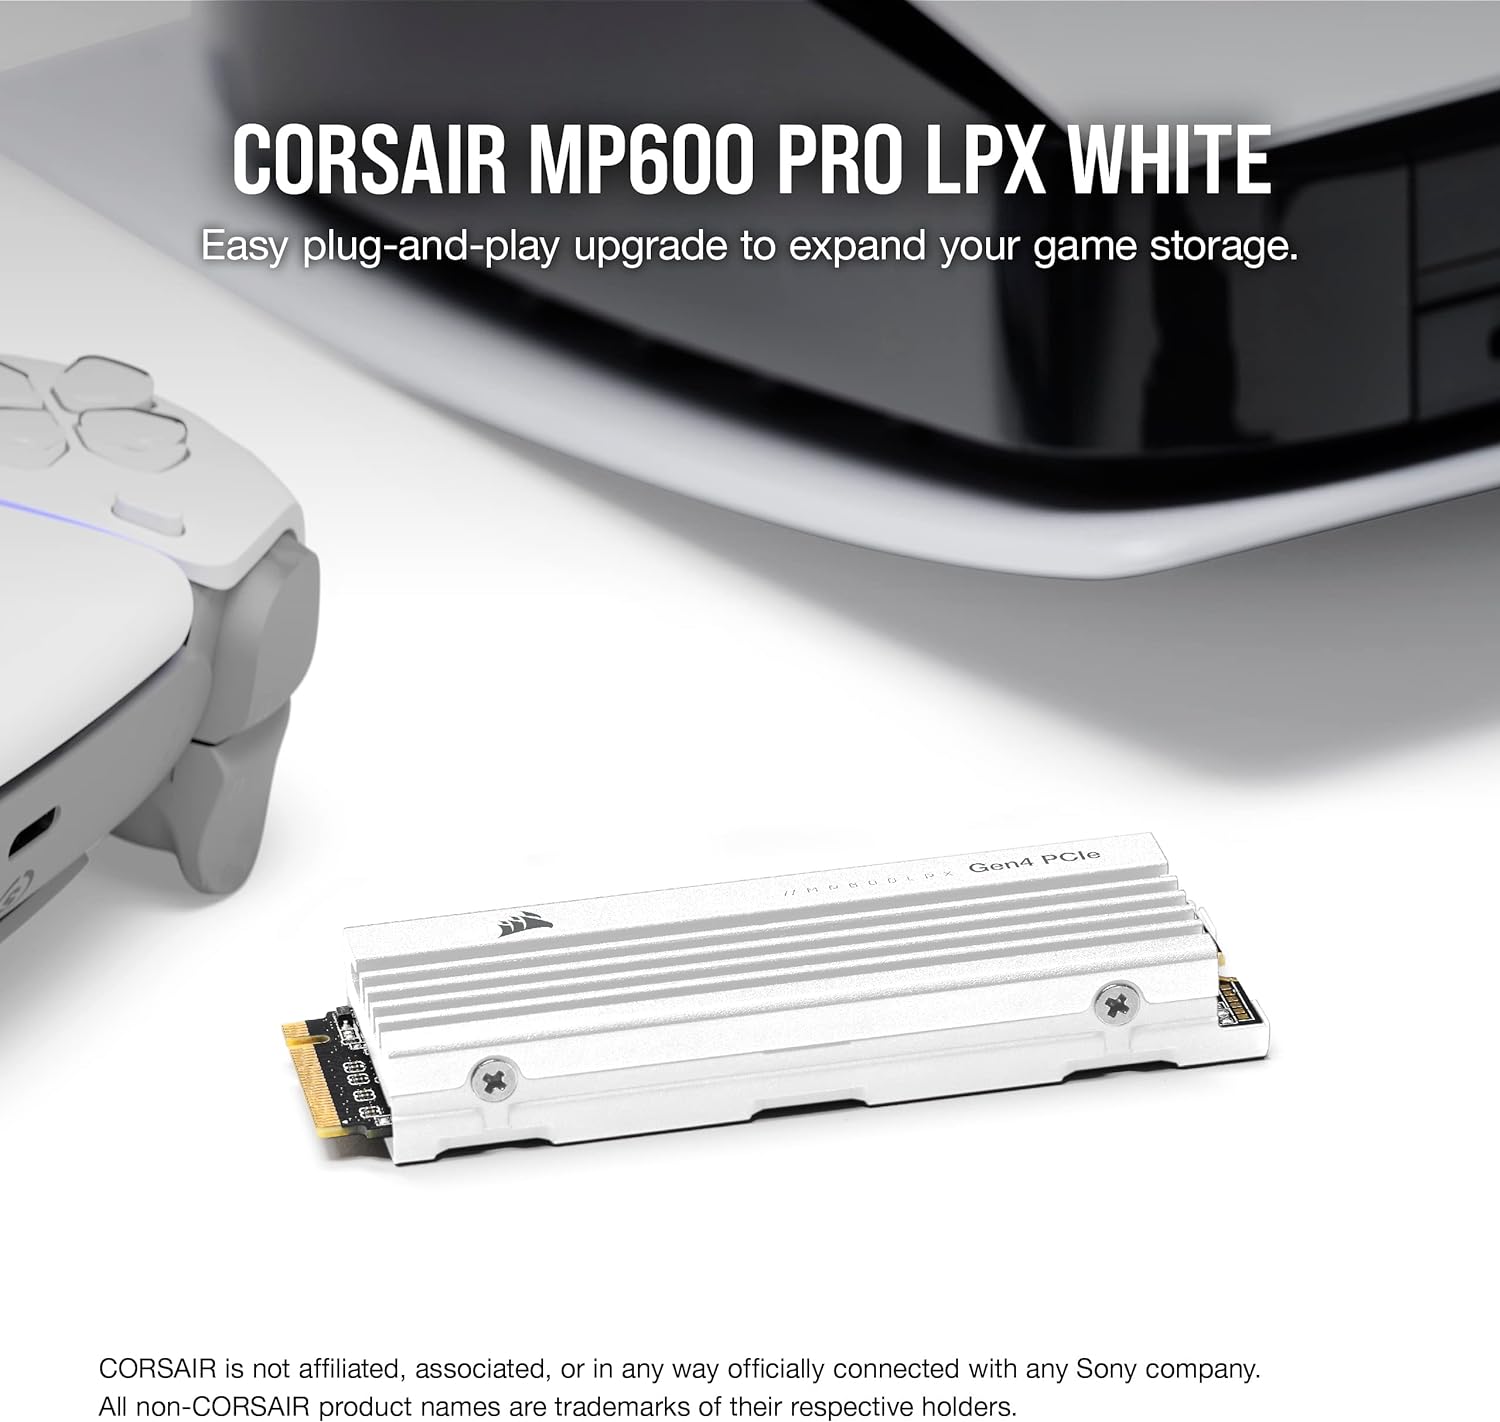 Corsair MP600 PRO 2TB M.2 - Optimised for PS5 - NVMe PCIe x4 Gen4 SSD - Up to 7,100MB/sec Read & 6,800MB/sec Write Speeds